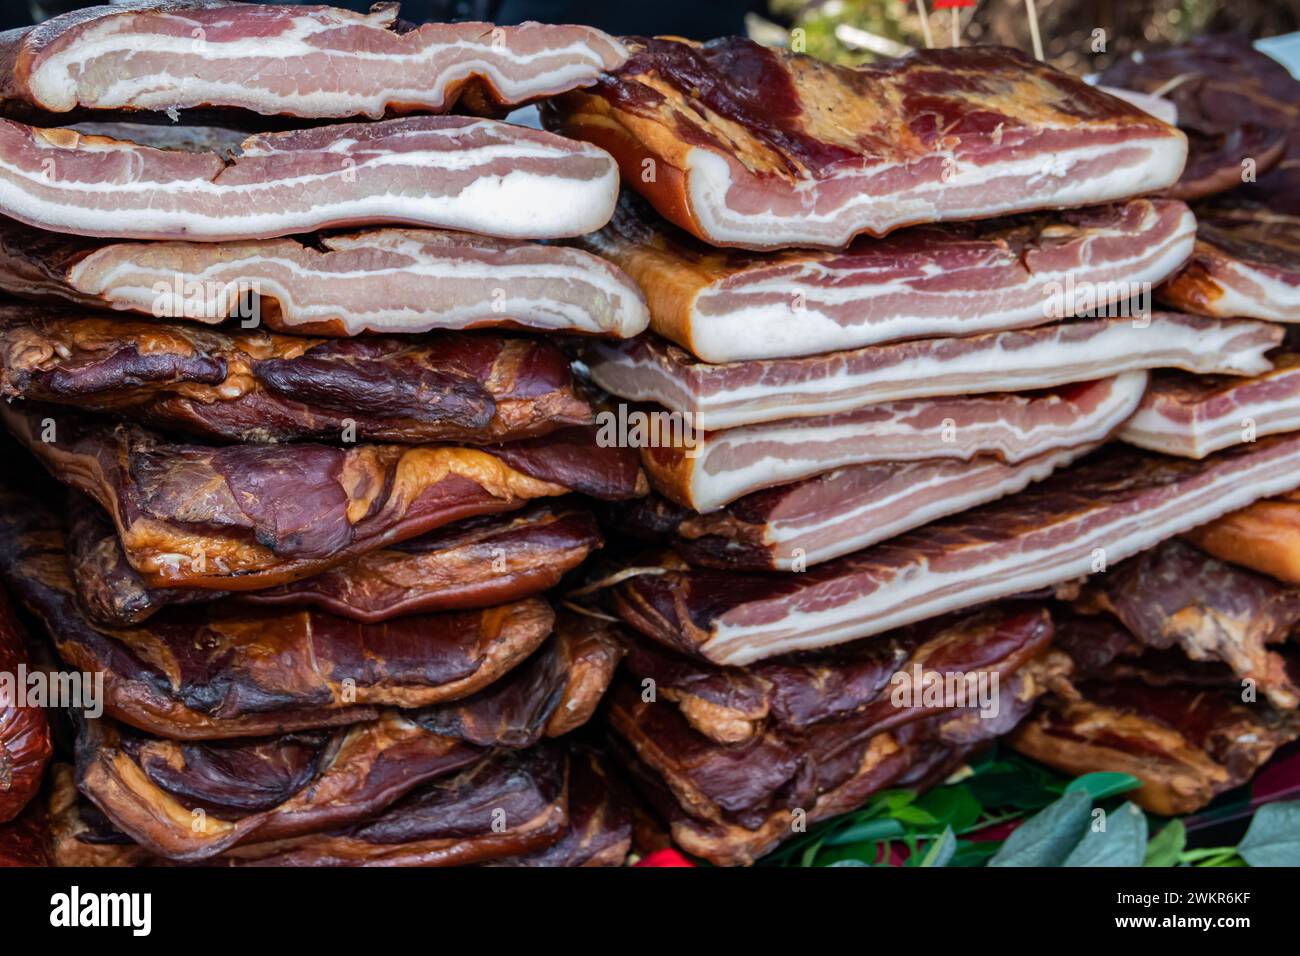 Exposed bacon and dried meat domestic products presented for sale on a farmer's market in Kacarevo village,gastro bacon and dry meat products festival Stock Photo